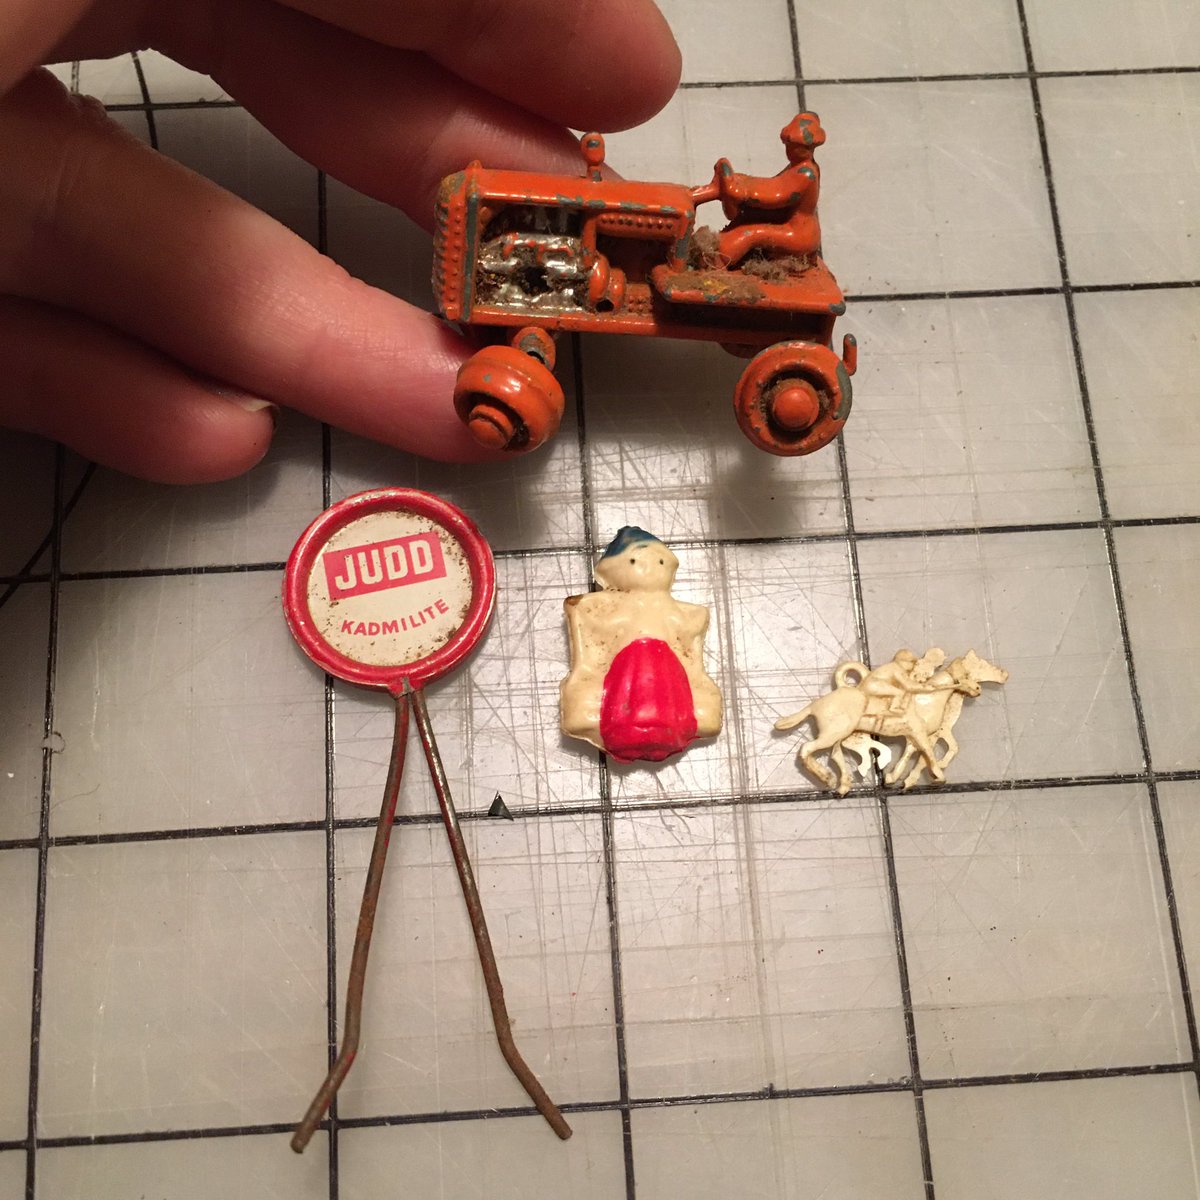 These are c. 1950. The Judd Kadmilite pin is a hardware store display for eye- hooks, the two-sided molded plastic charms and the cast metal toy tractor are all c. 1950 toys.